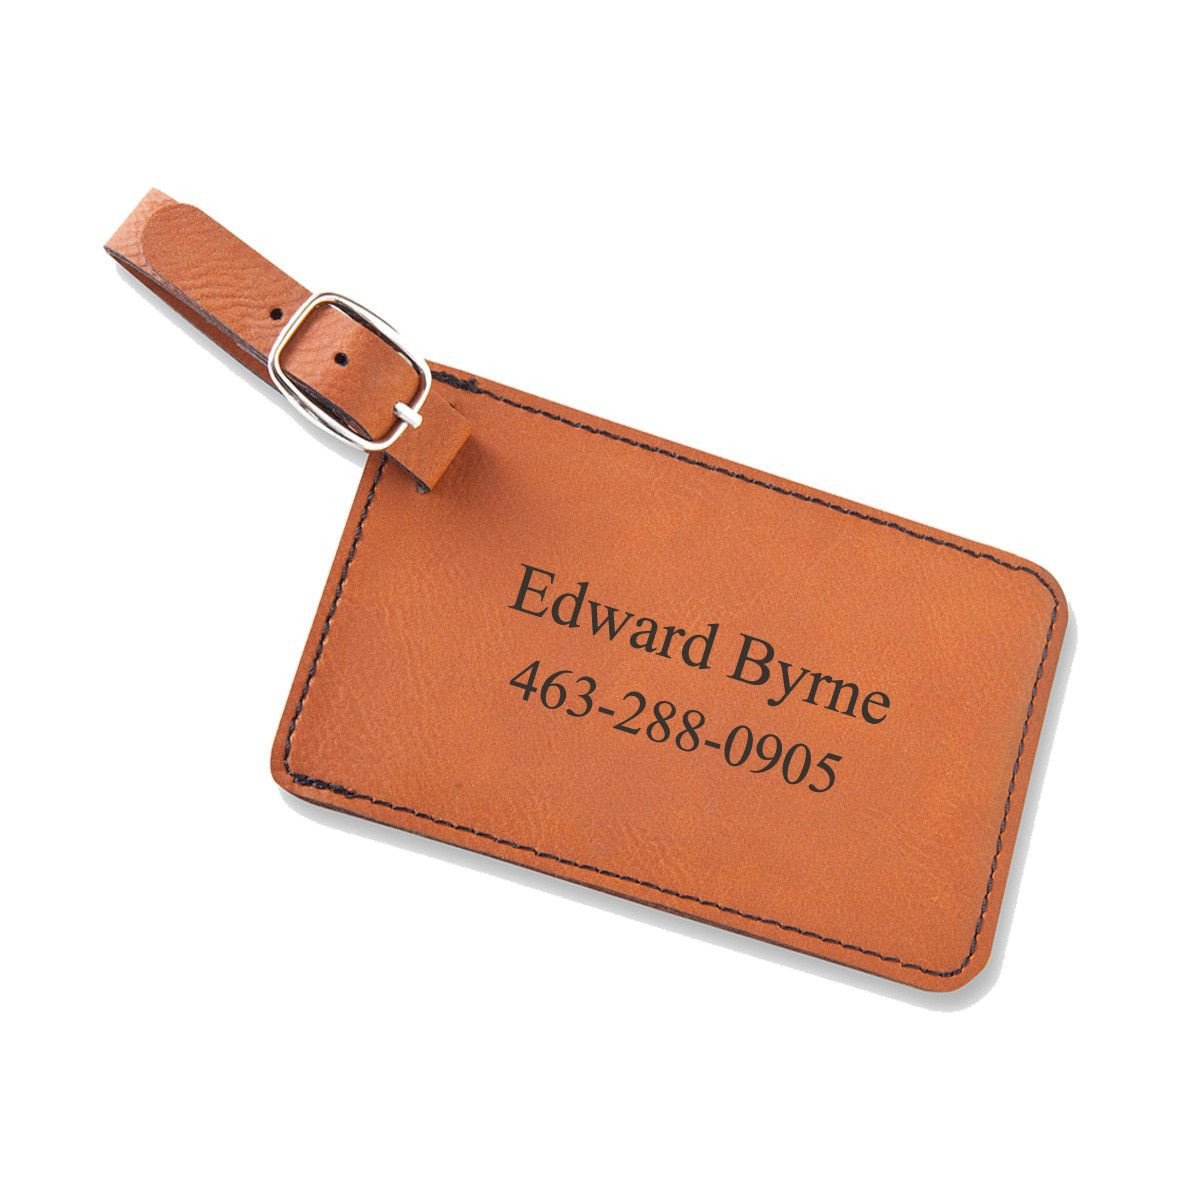 Personalized Leatherette Luggage Tags